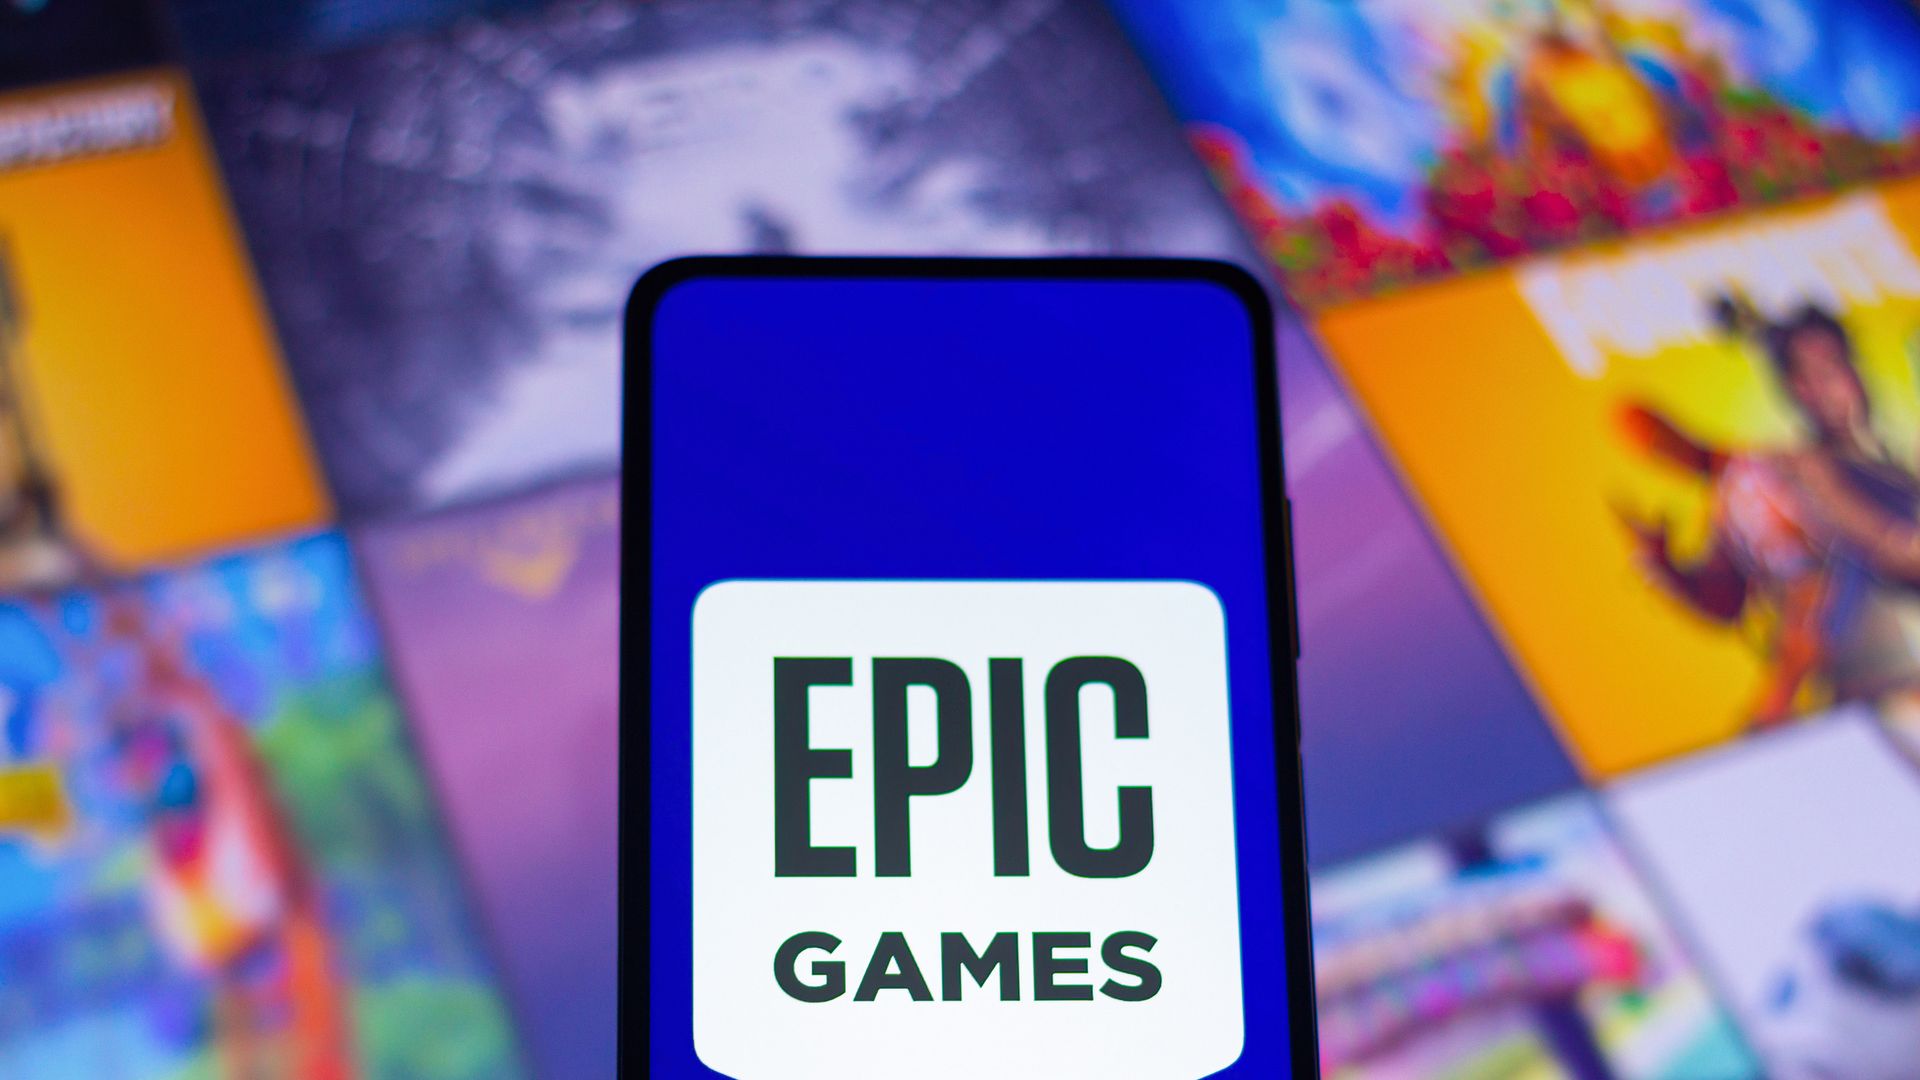 Photo illustration of a phone displaying the Epic Logo, with video game title screens displayed behind the phone